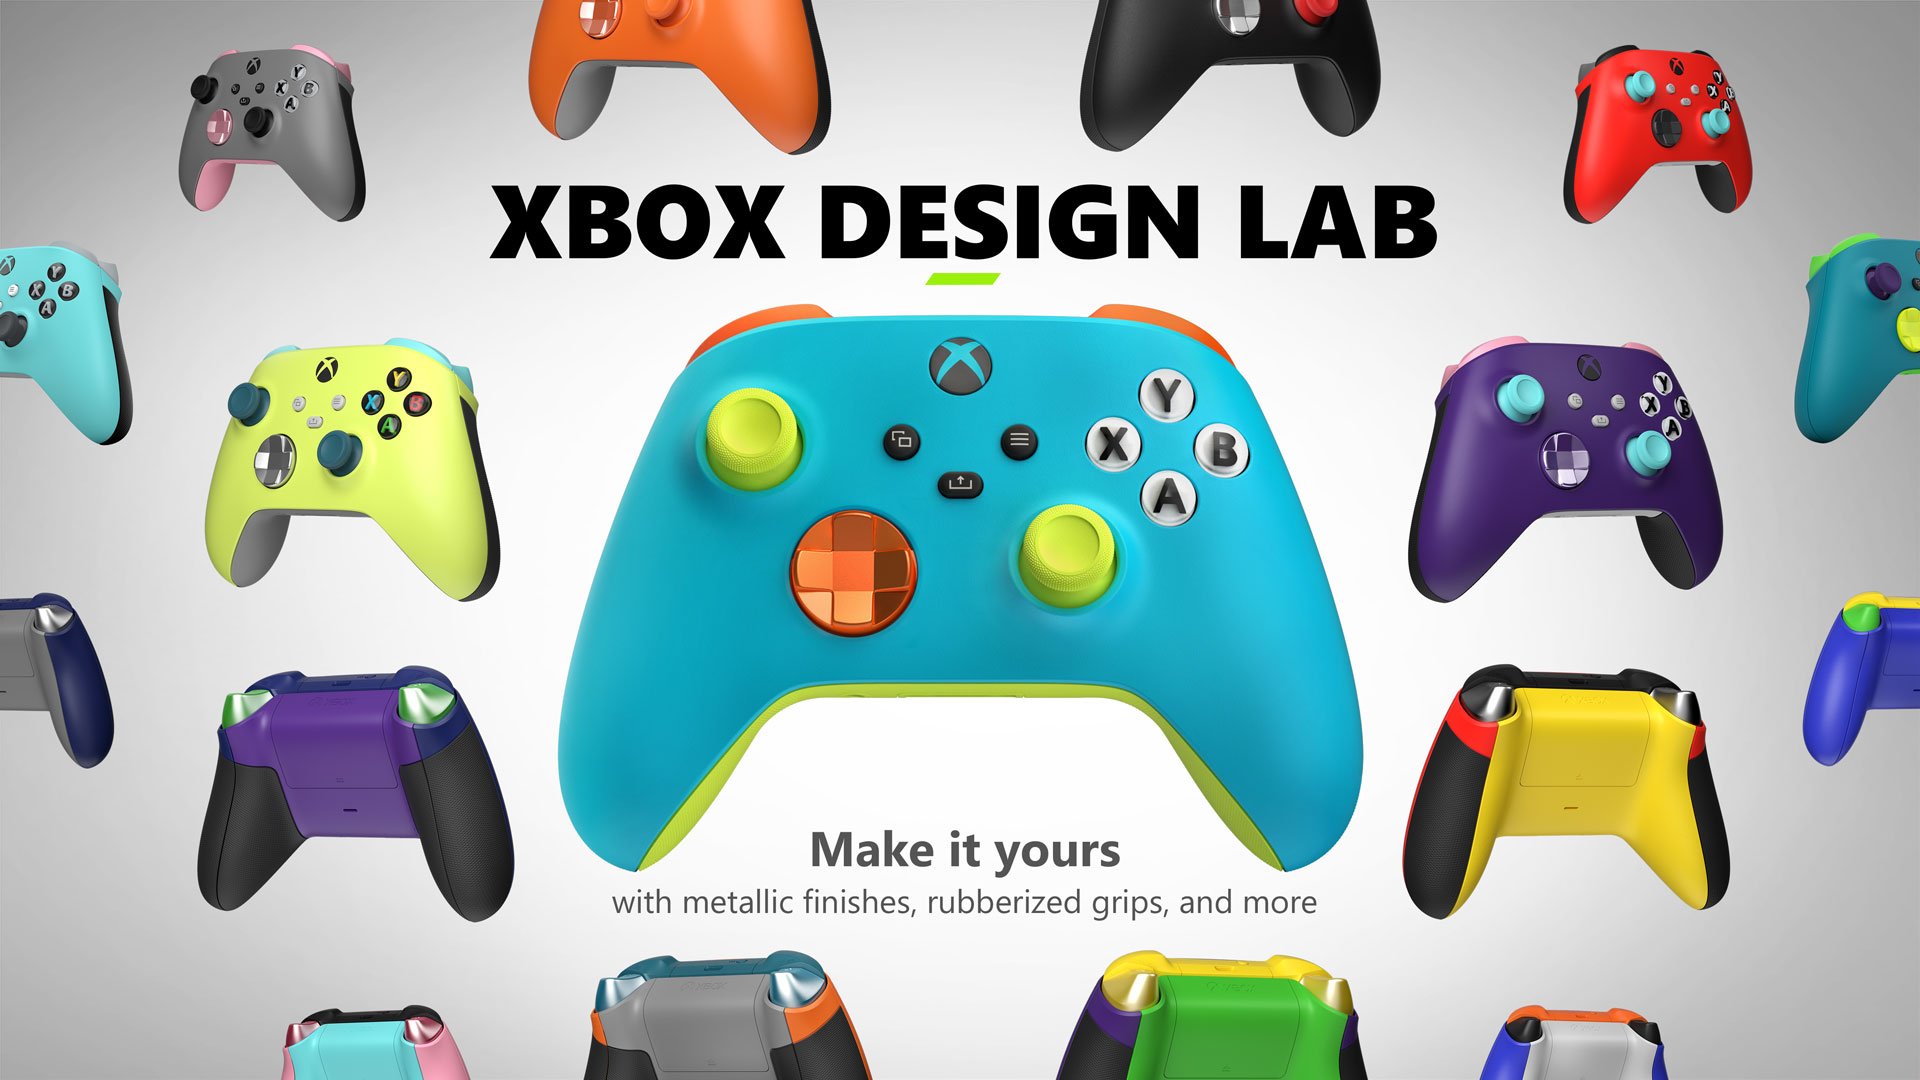 The Xbox Design Lab Adds Rubberized Grips Metal Accents New Colors